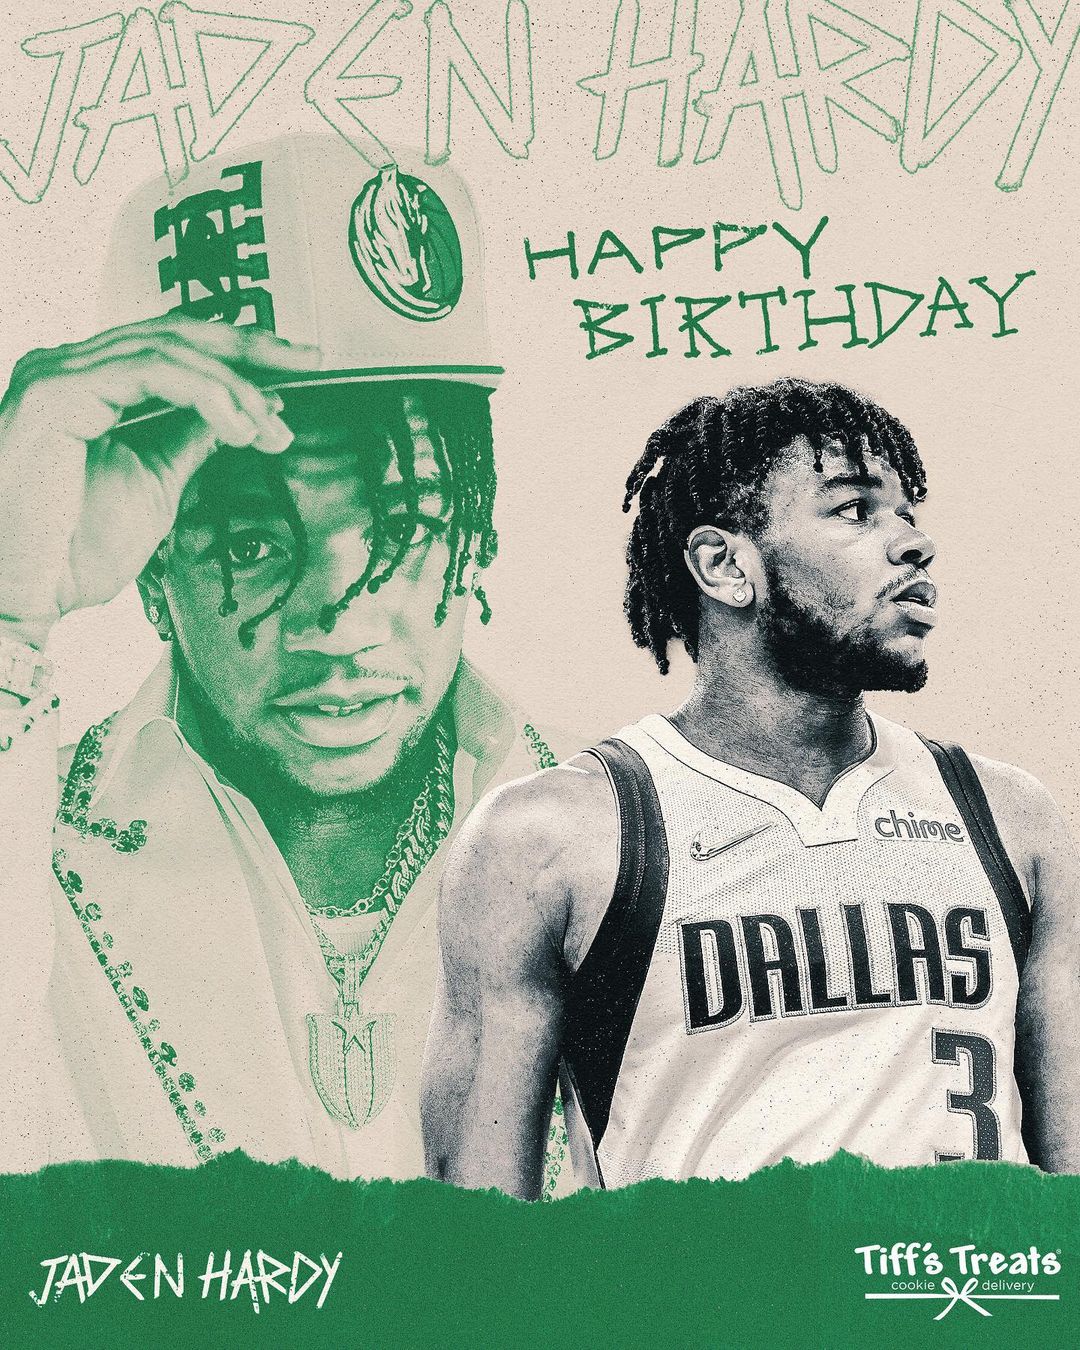 Happiest of birthdays to our rook, @jhardy!  #MFFL...